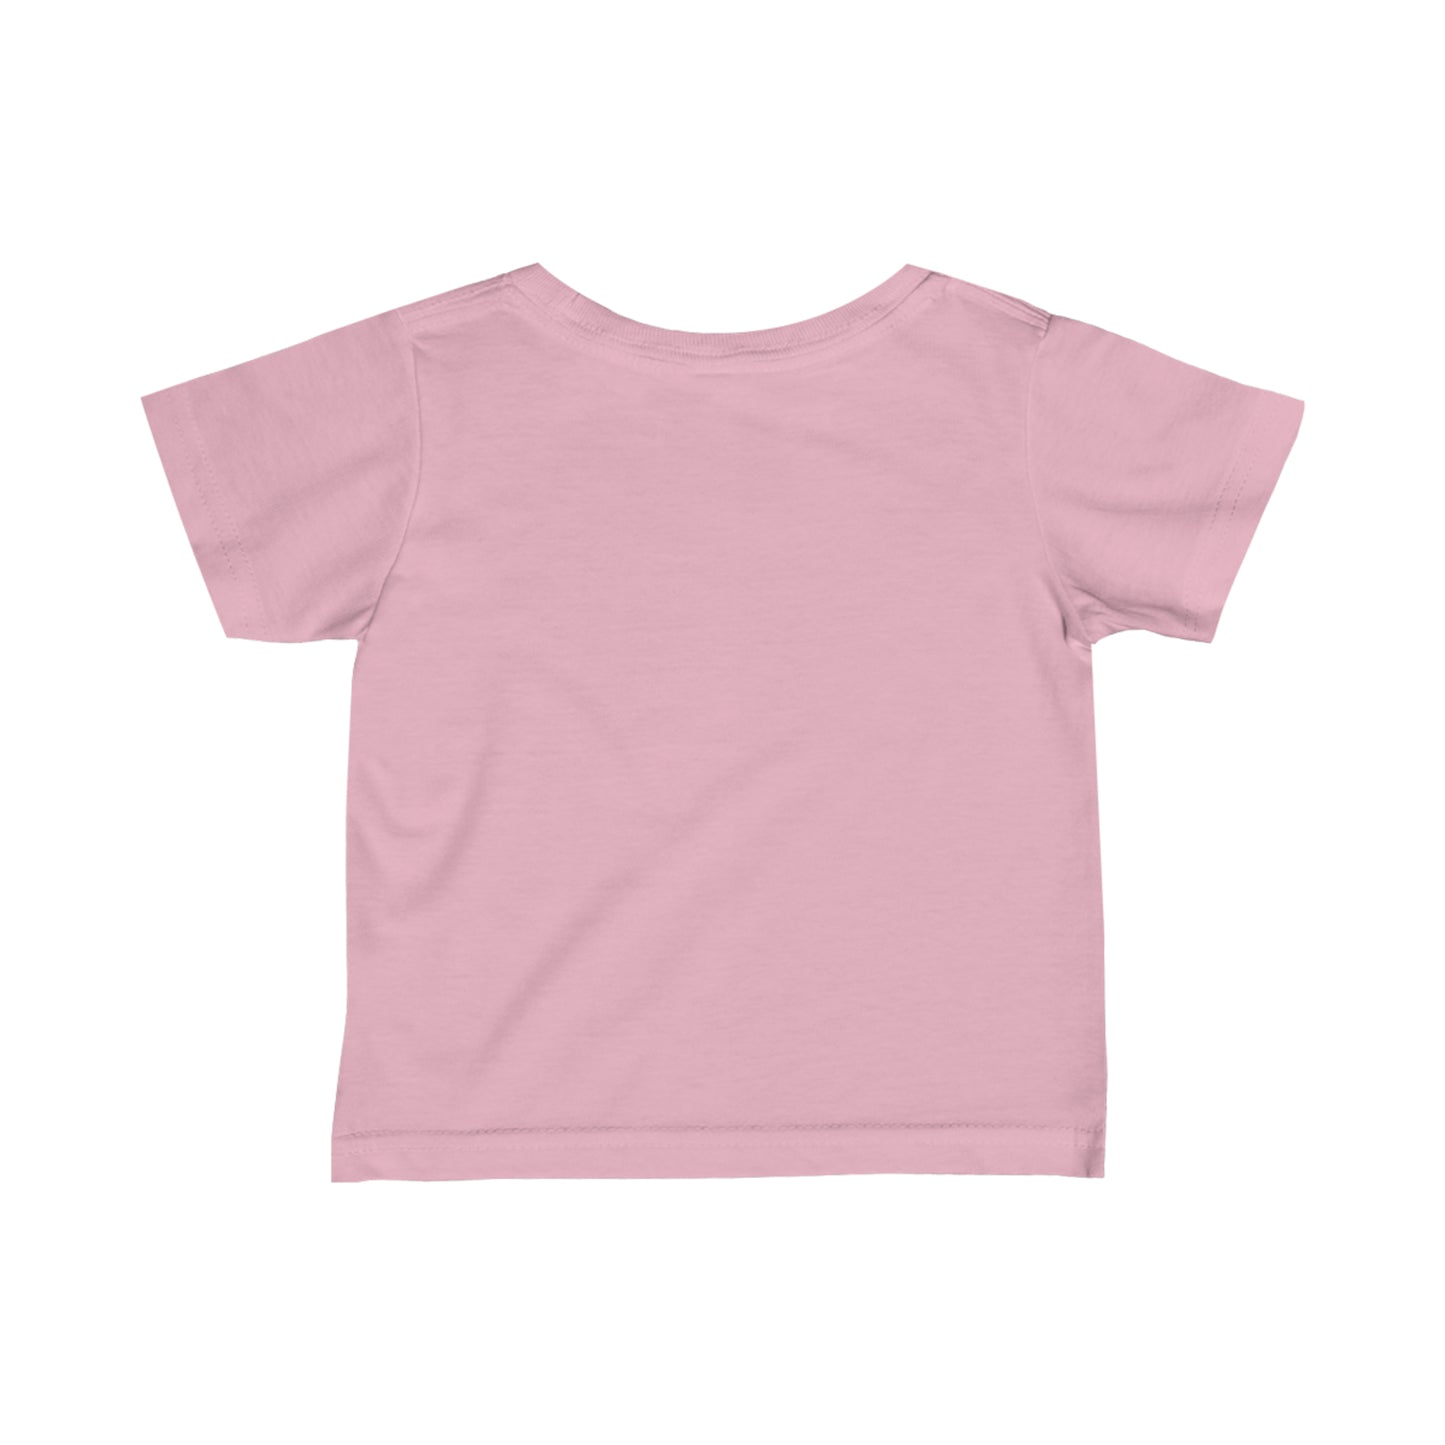 Rise - Infant Tee - Pink